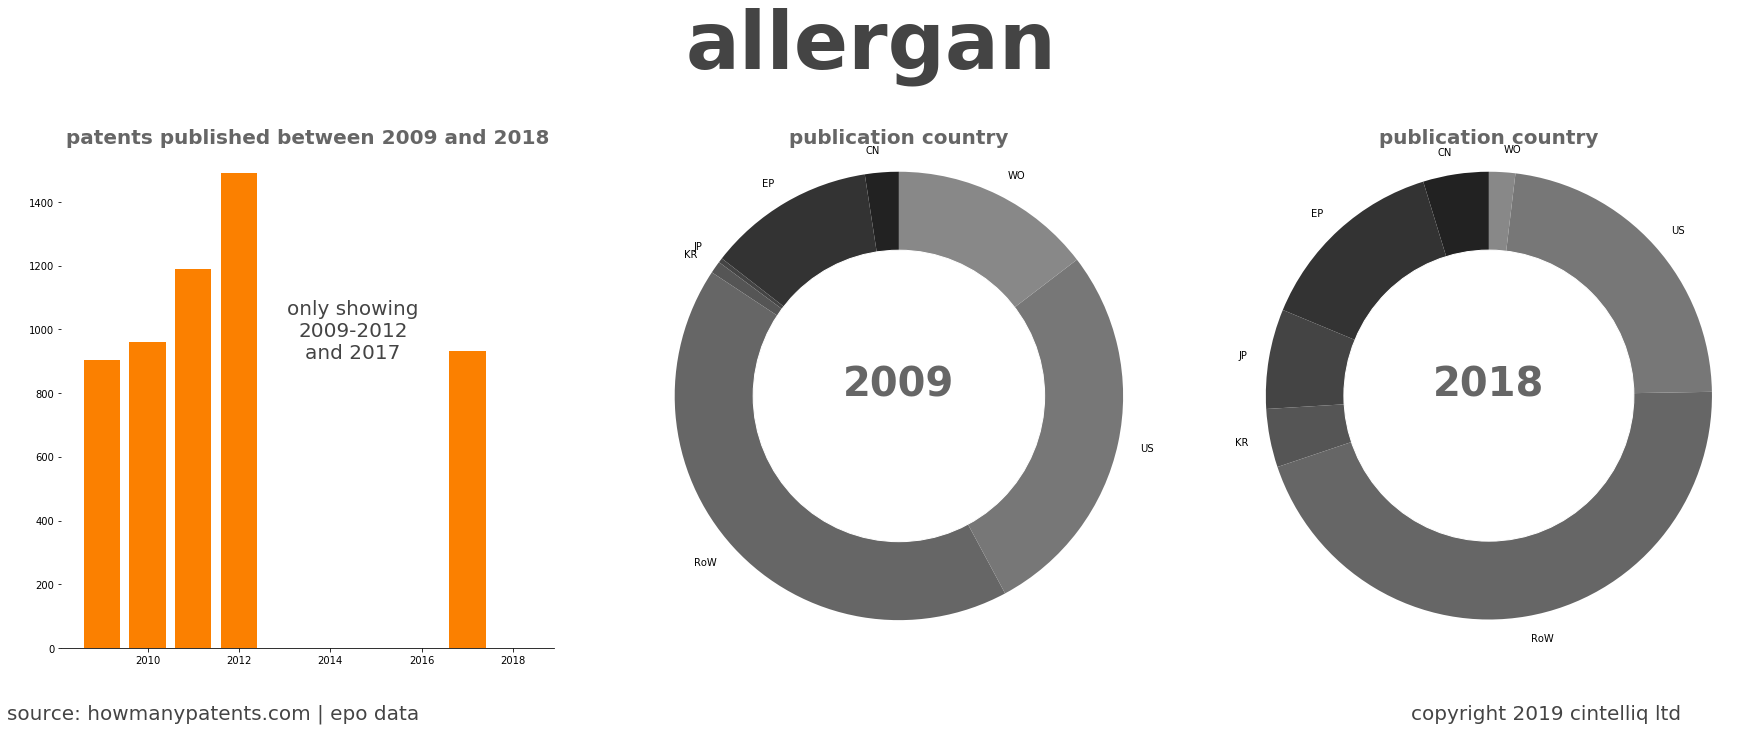 summary of patents for Allergan